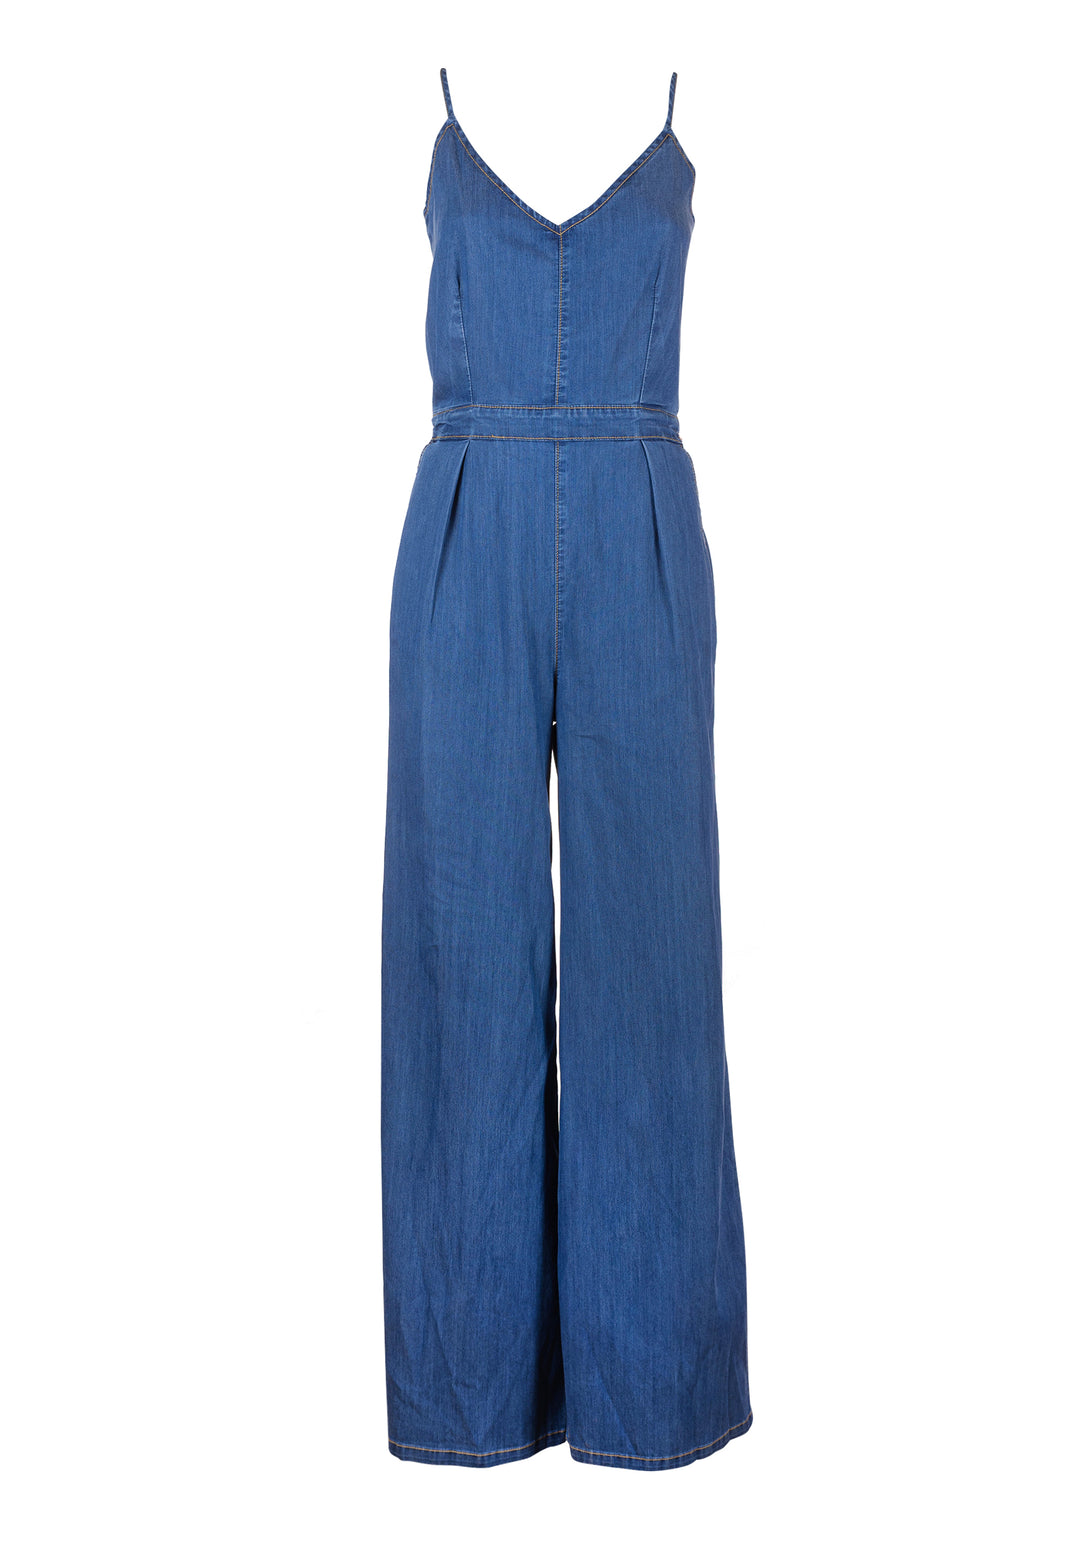 Sleeveless overall made in chambray